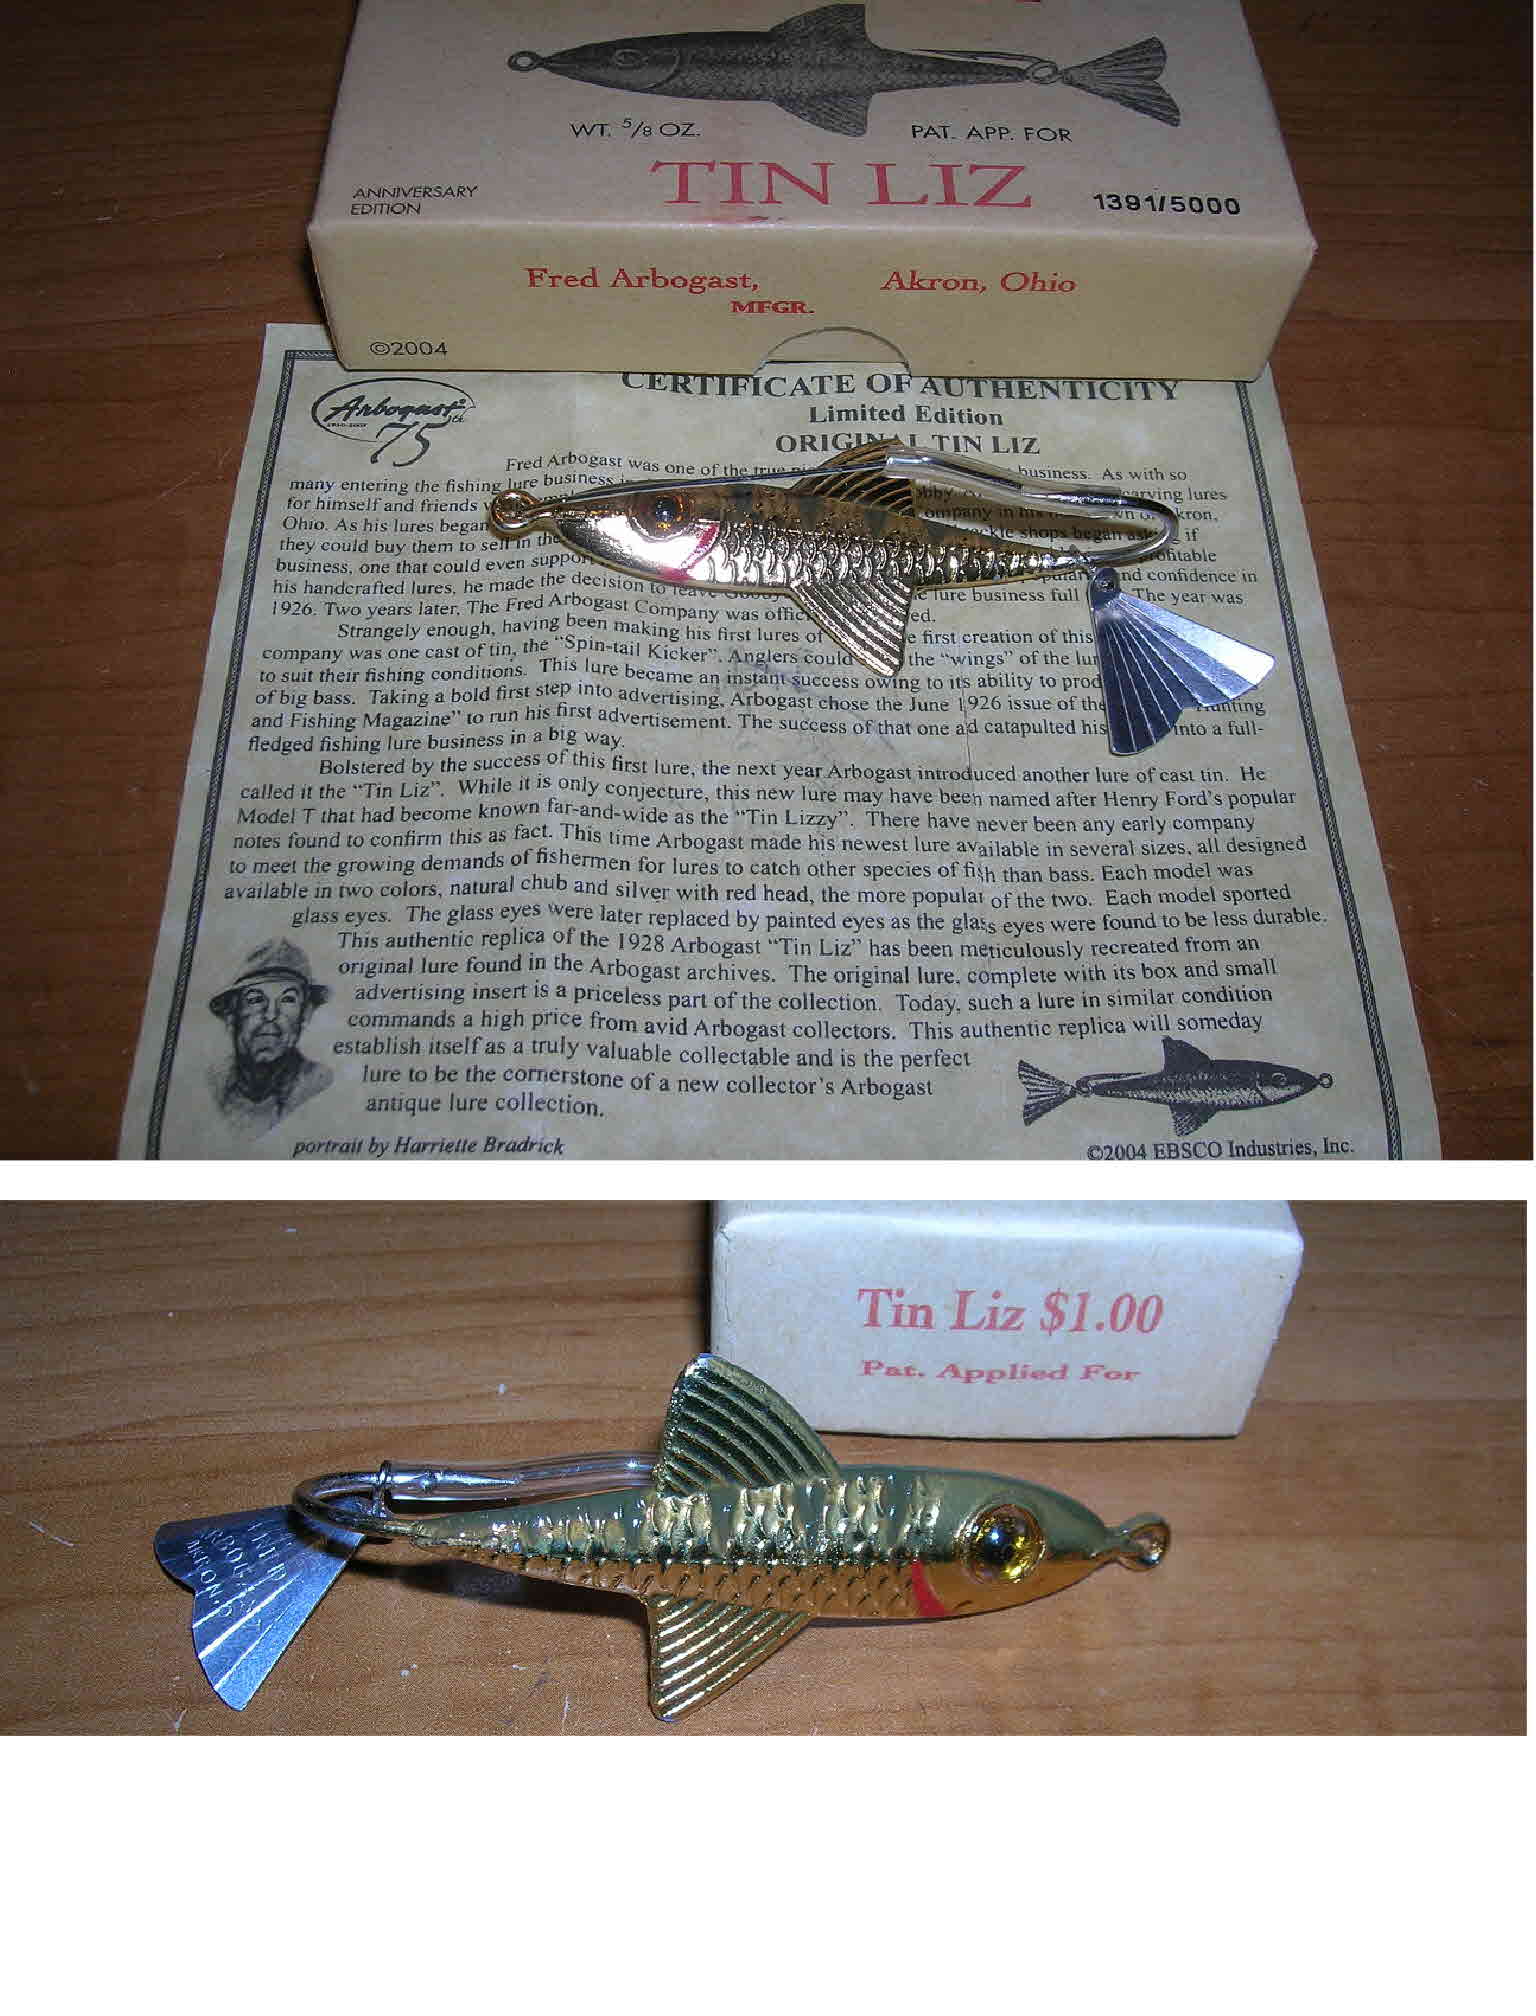 Vintage 1960 Buzzter Boy Electronic Fishing Lure by Aqua-Sonic, Red